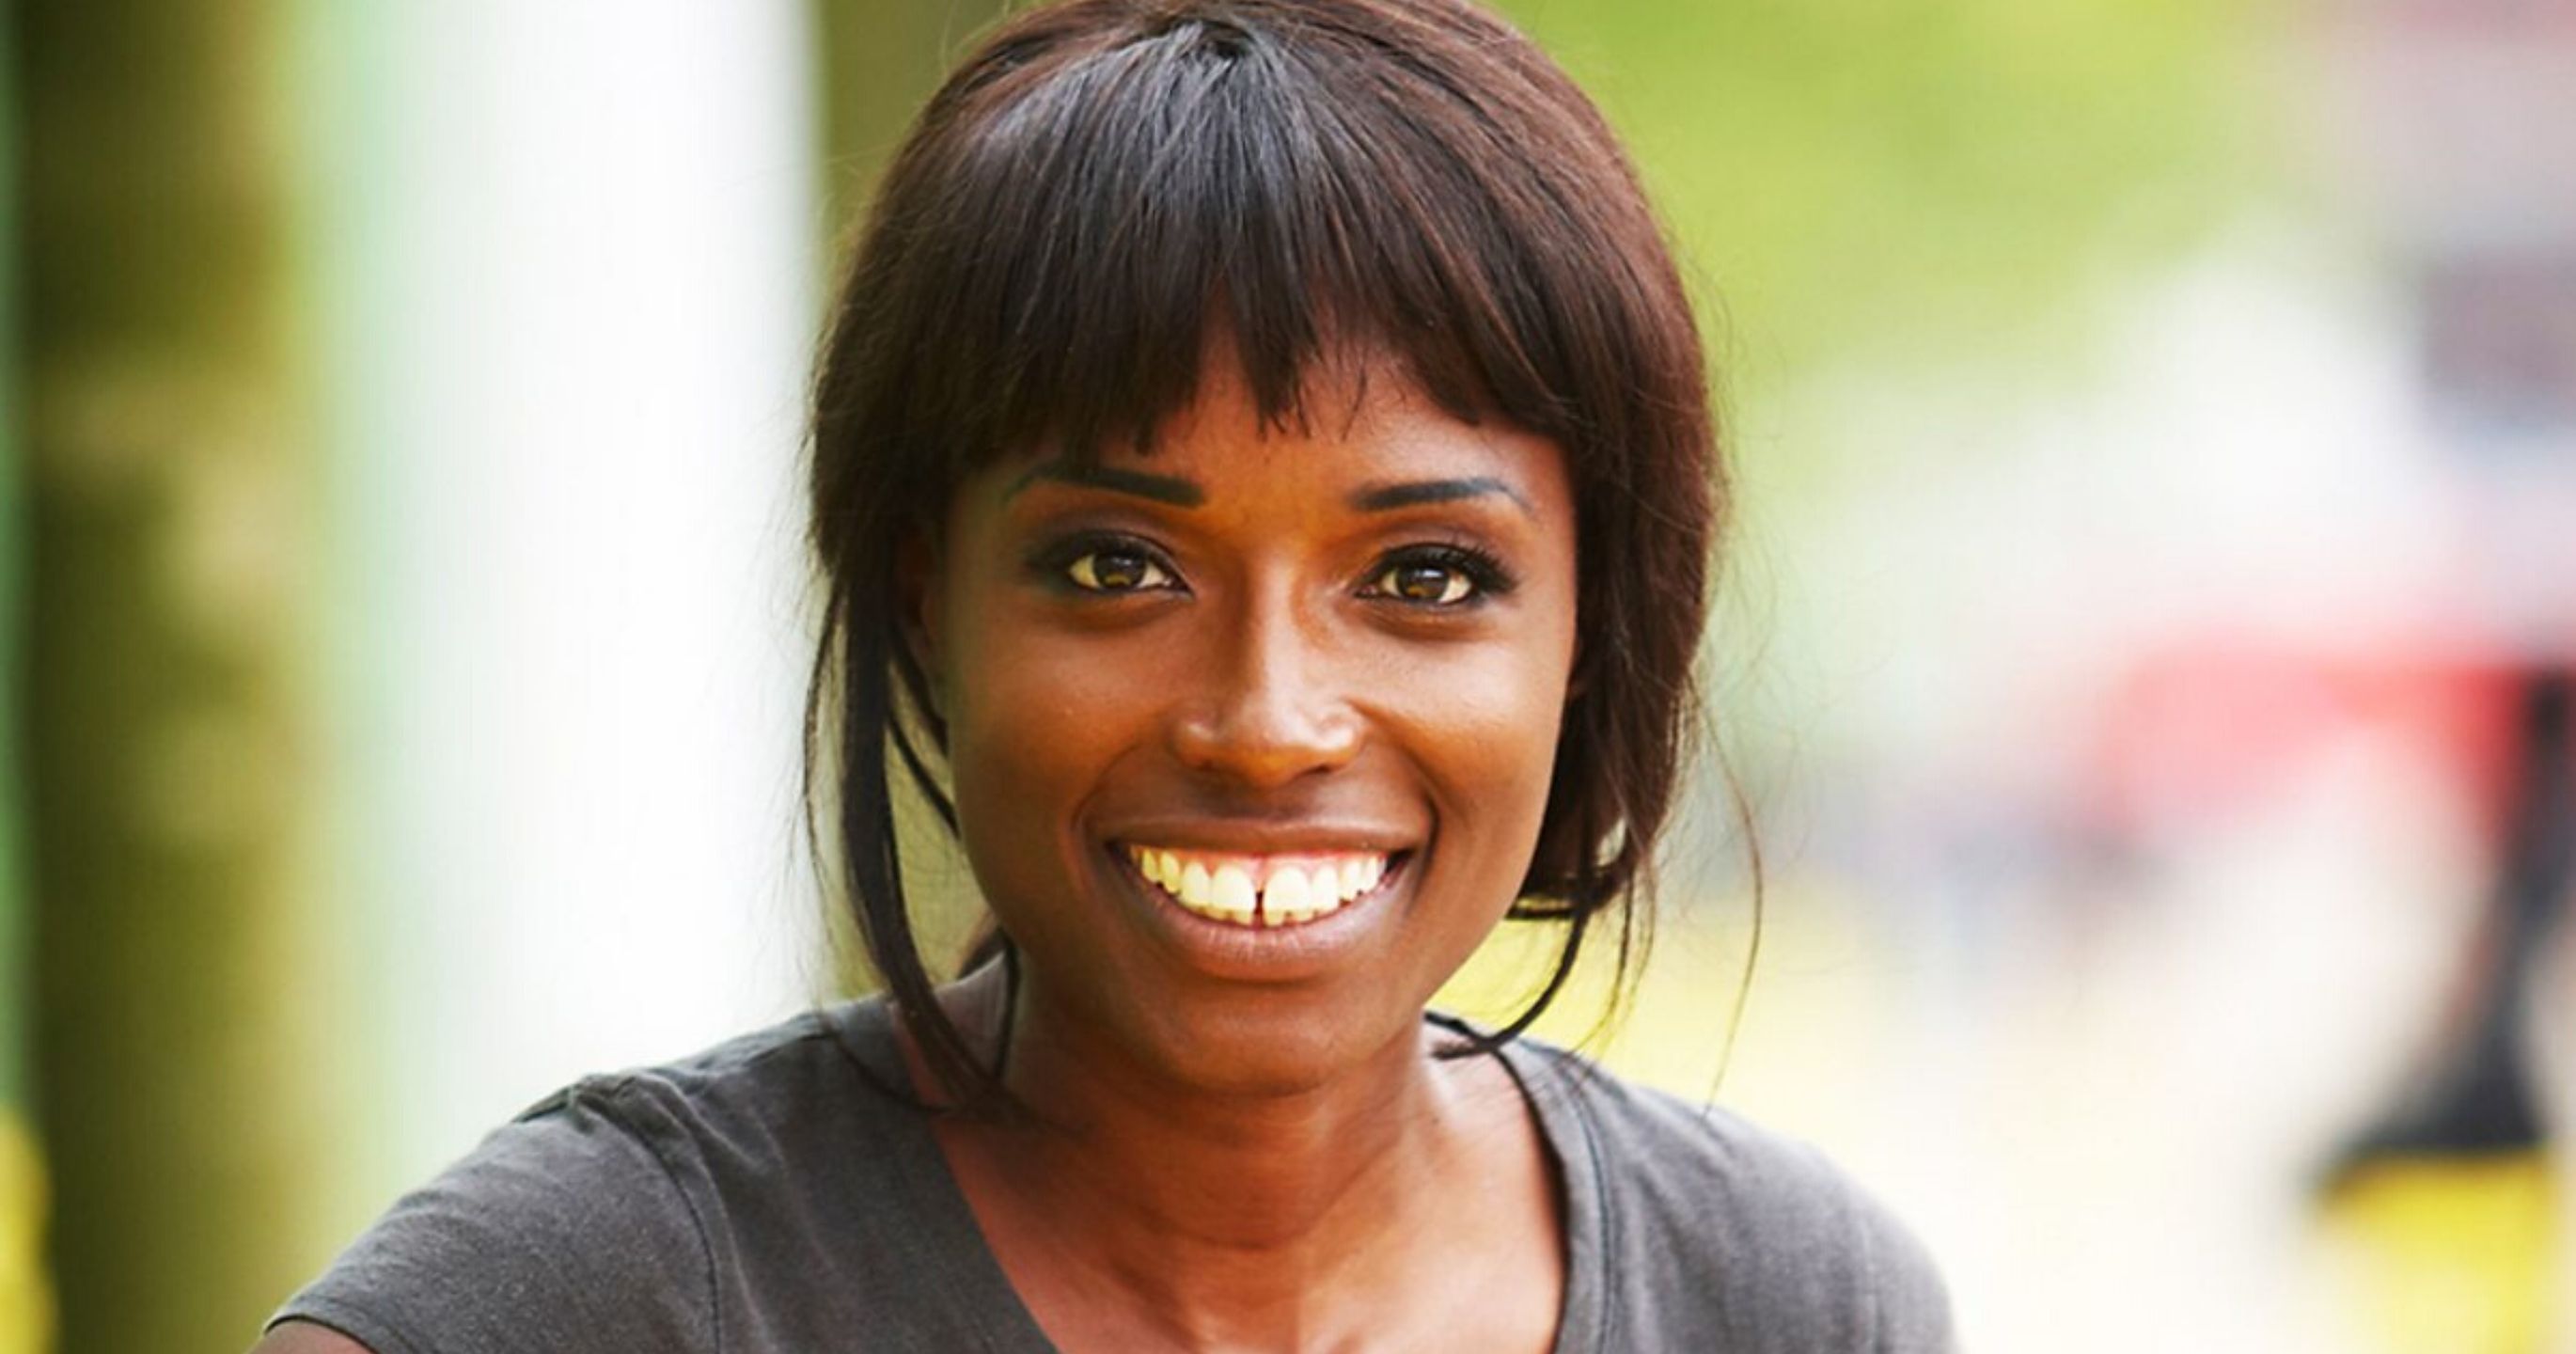 Lorraine Pascale smiles at the camera with a blurred background